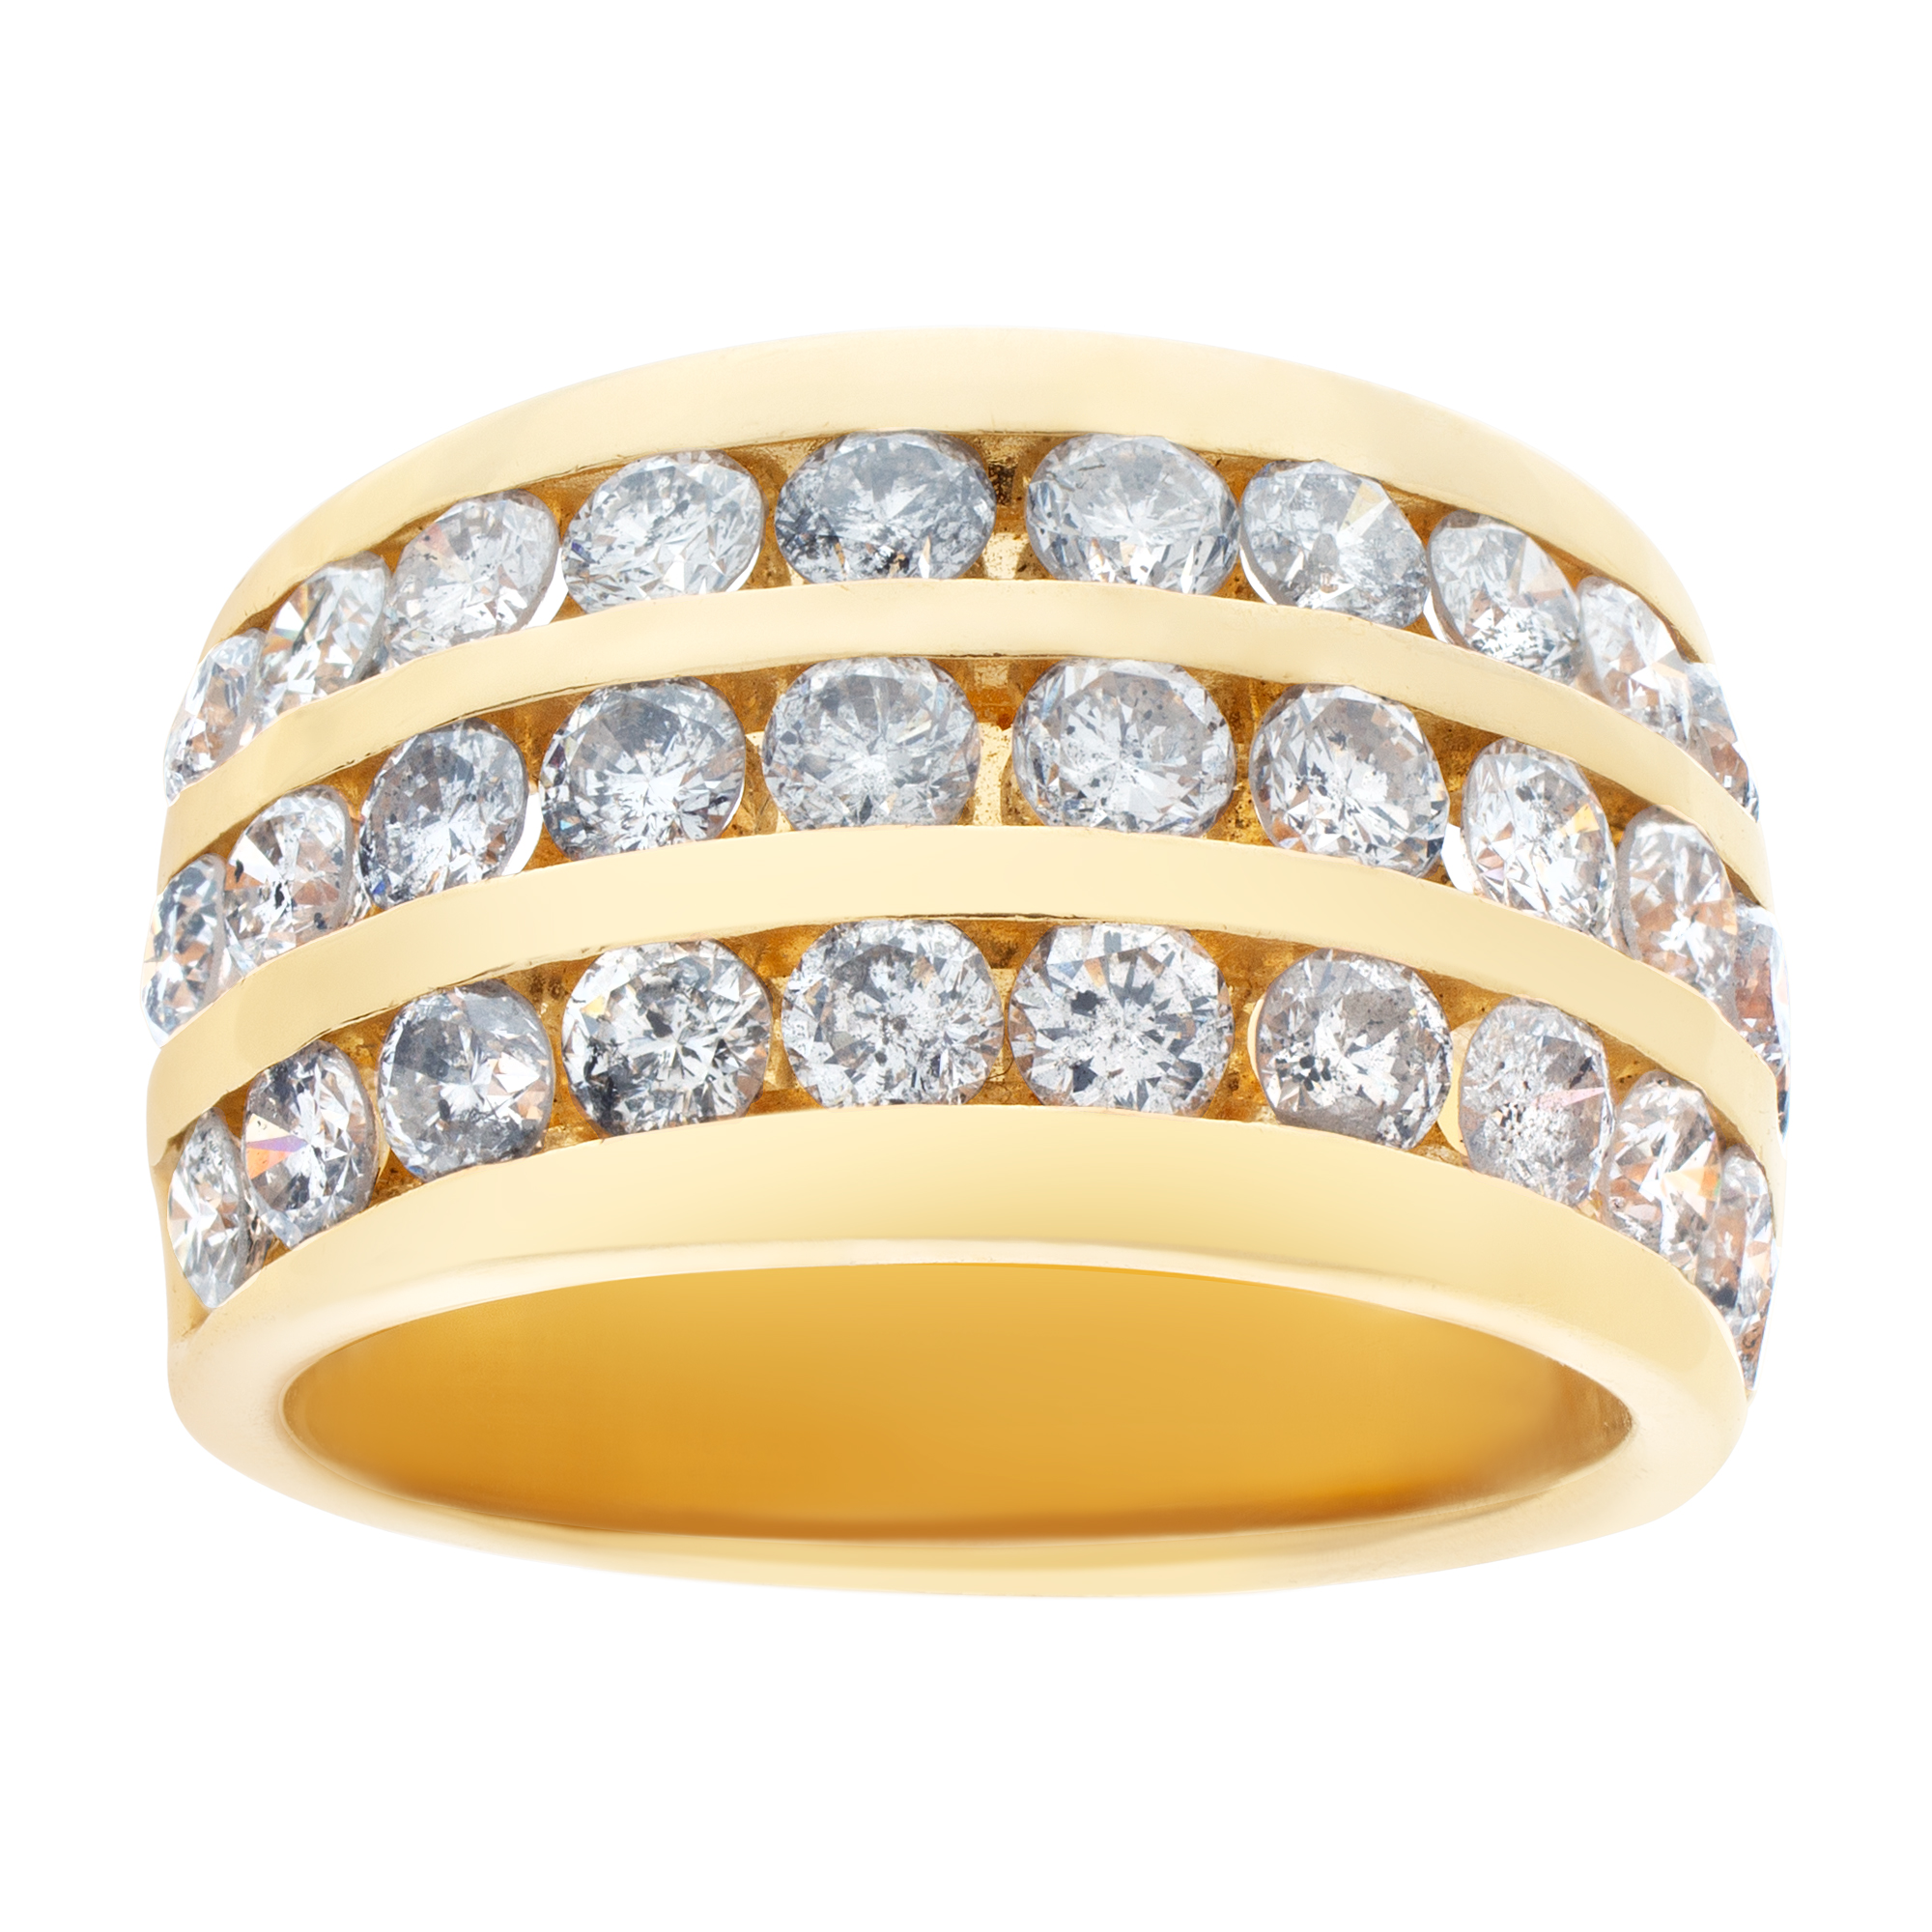 Wide band in 14k yellow gold. 1.50 carats in 3 rows of channel set diamonds